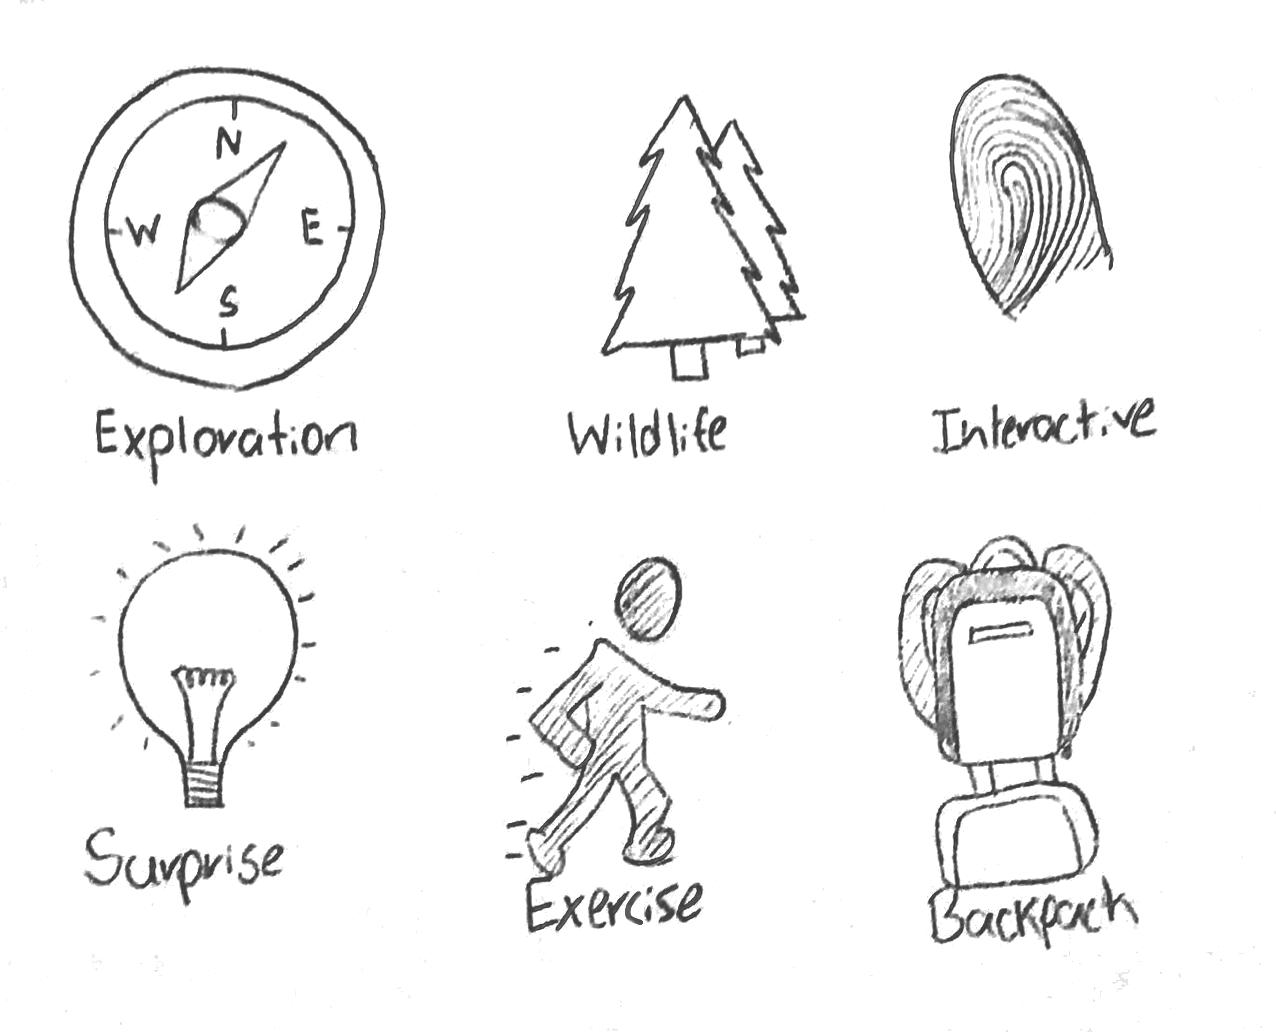 six symbols representing different parts of the Wander brand